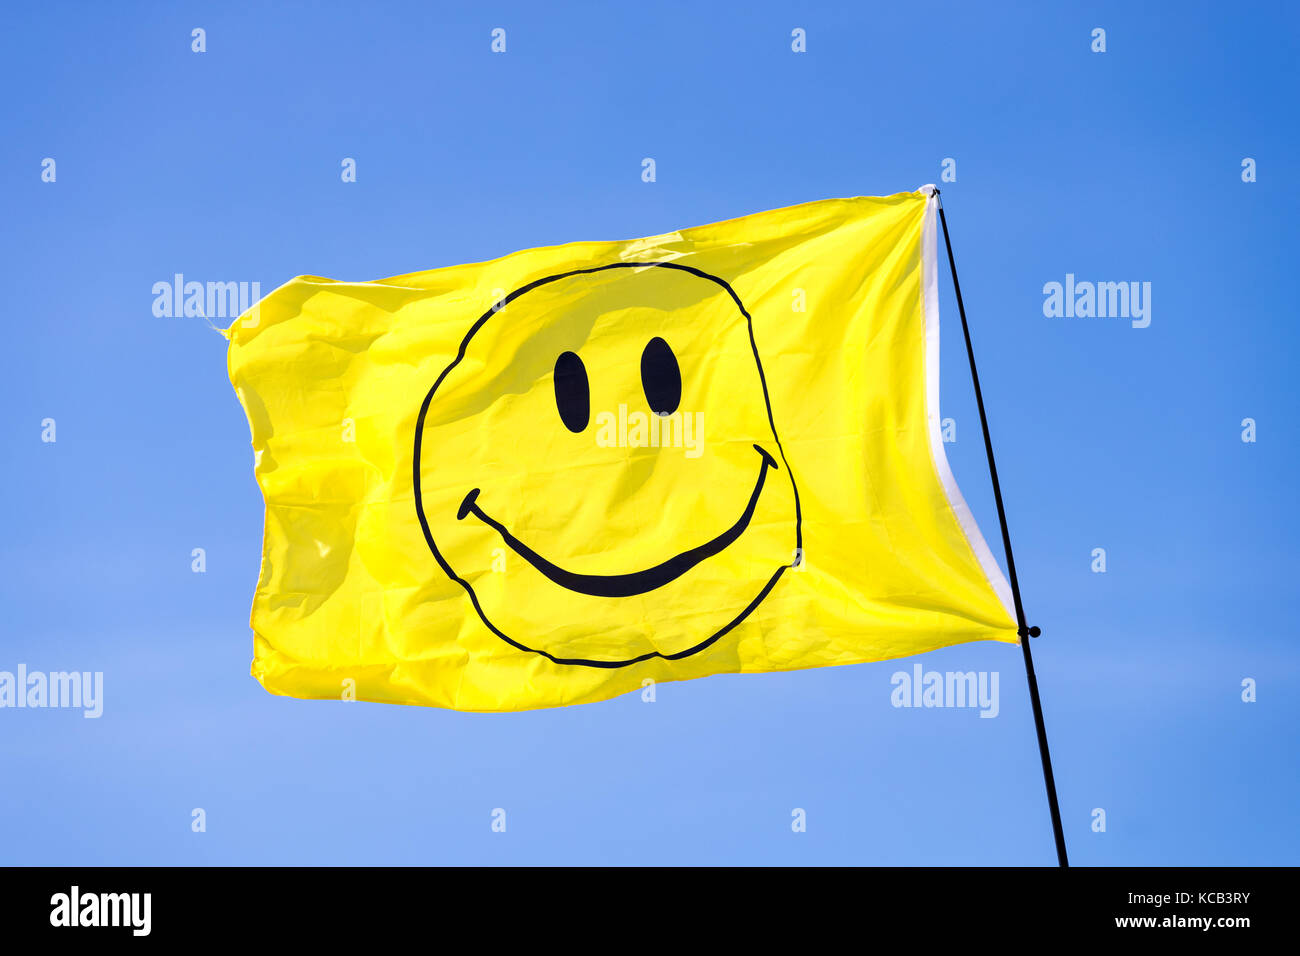 A yellow smiley face flag blowing in the wind against a blue sky Stock Photo